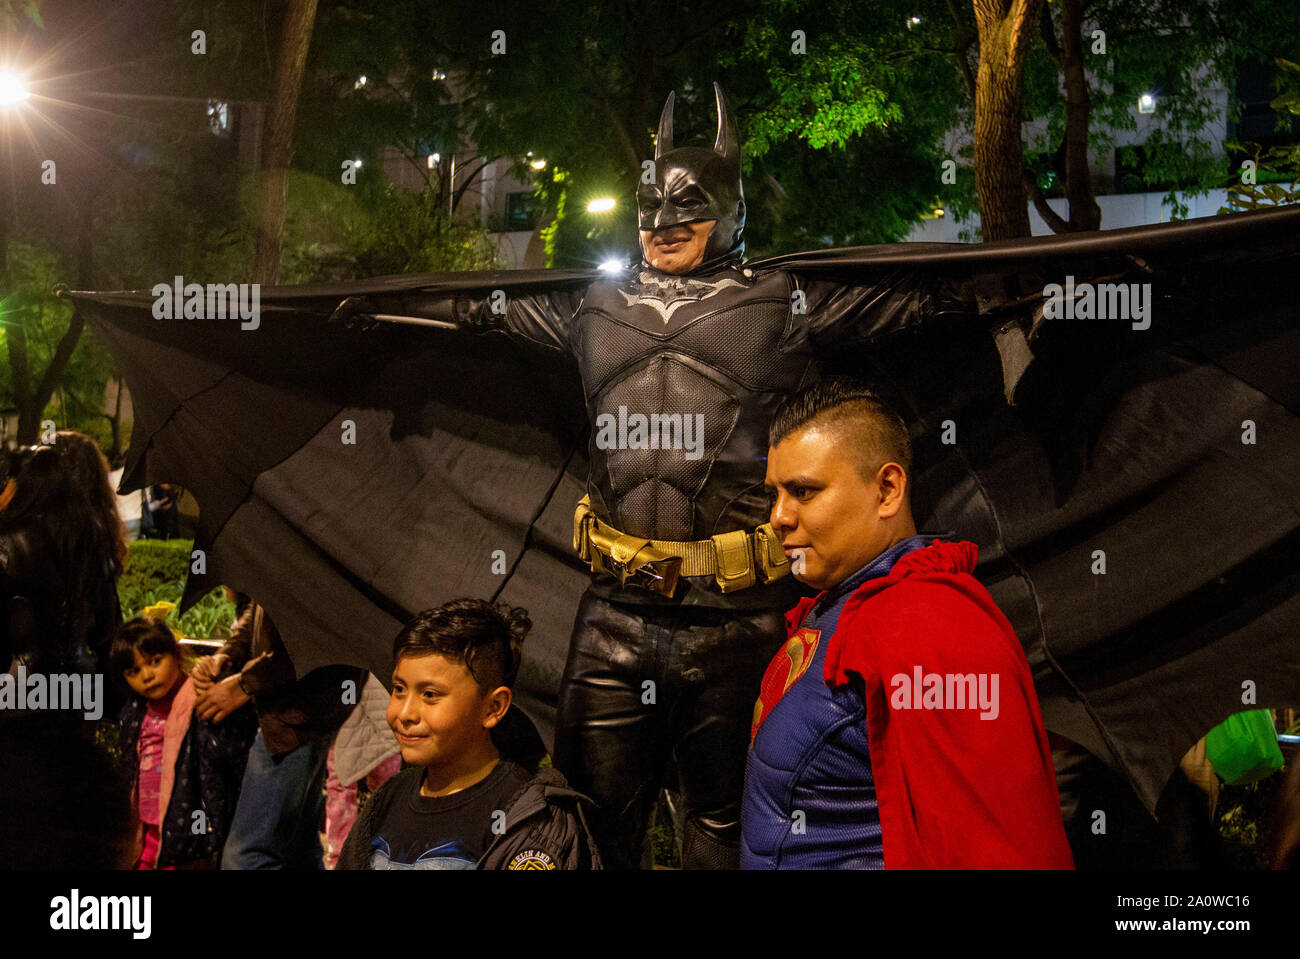 Mexiko Stadt, Mexico. 21st Sep, 2019. A man disguised as comic Batman takes  part in a celebration of Batman's 80th birthday. On Saturday Batman fans  celebrated the 80th birthday of their comic-